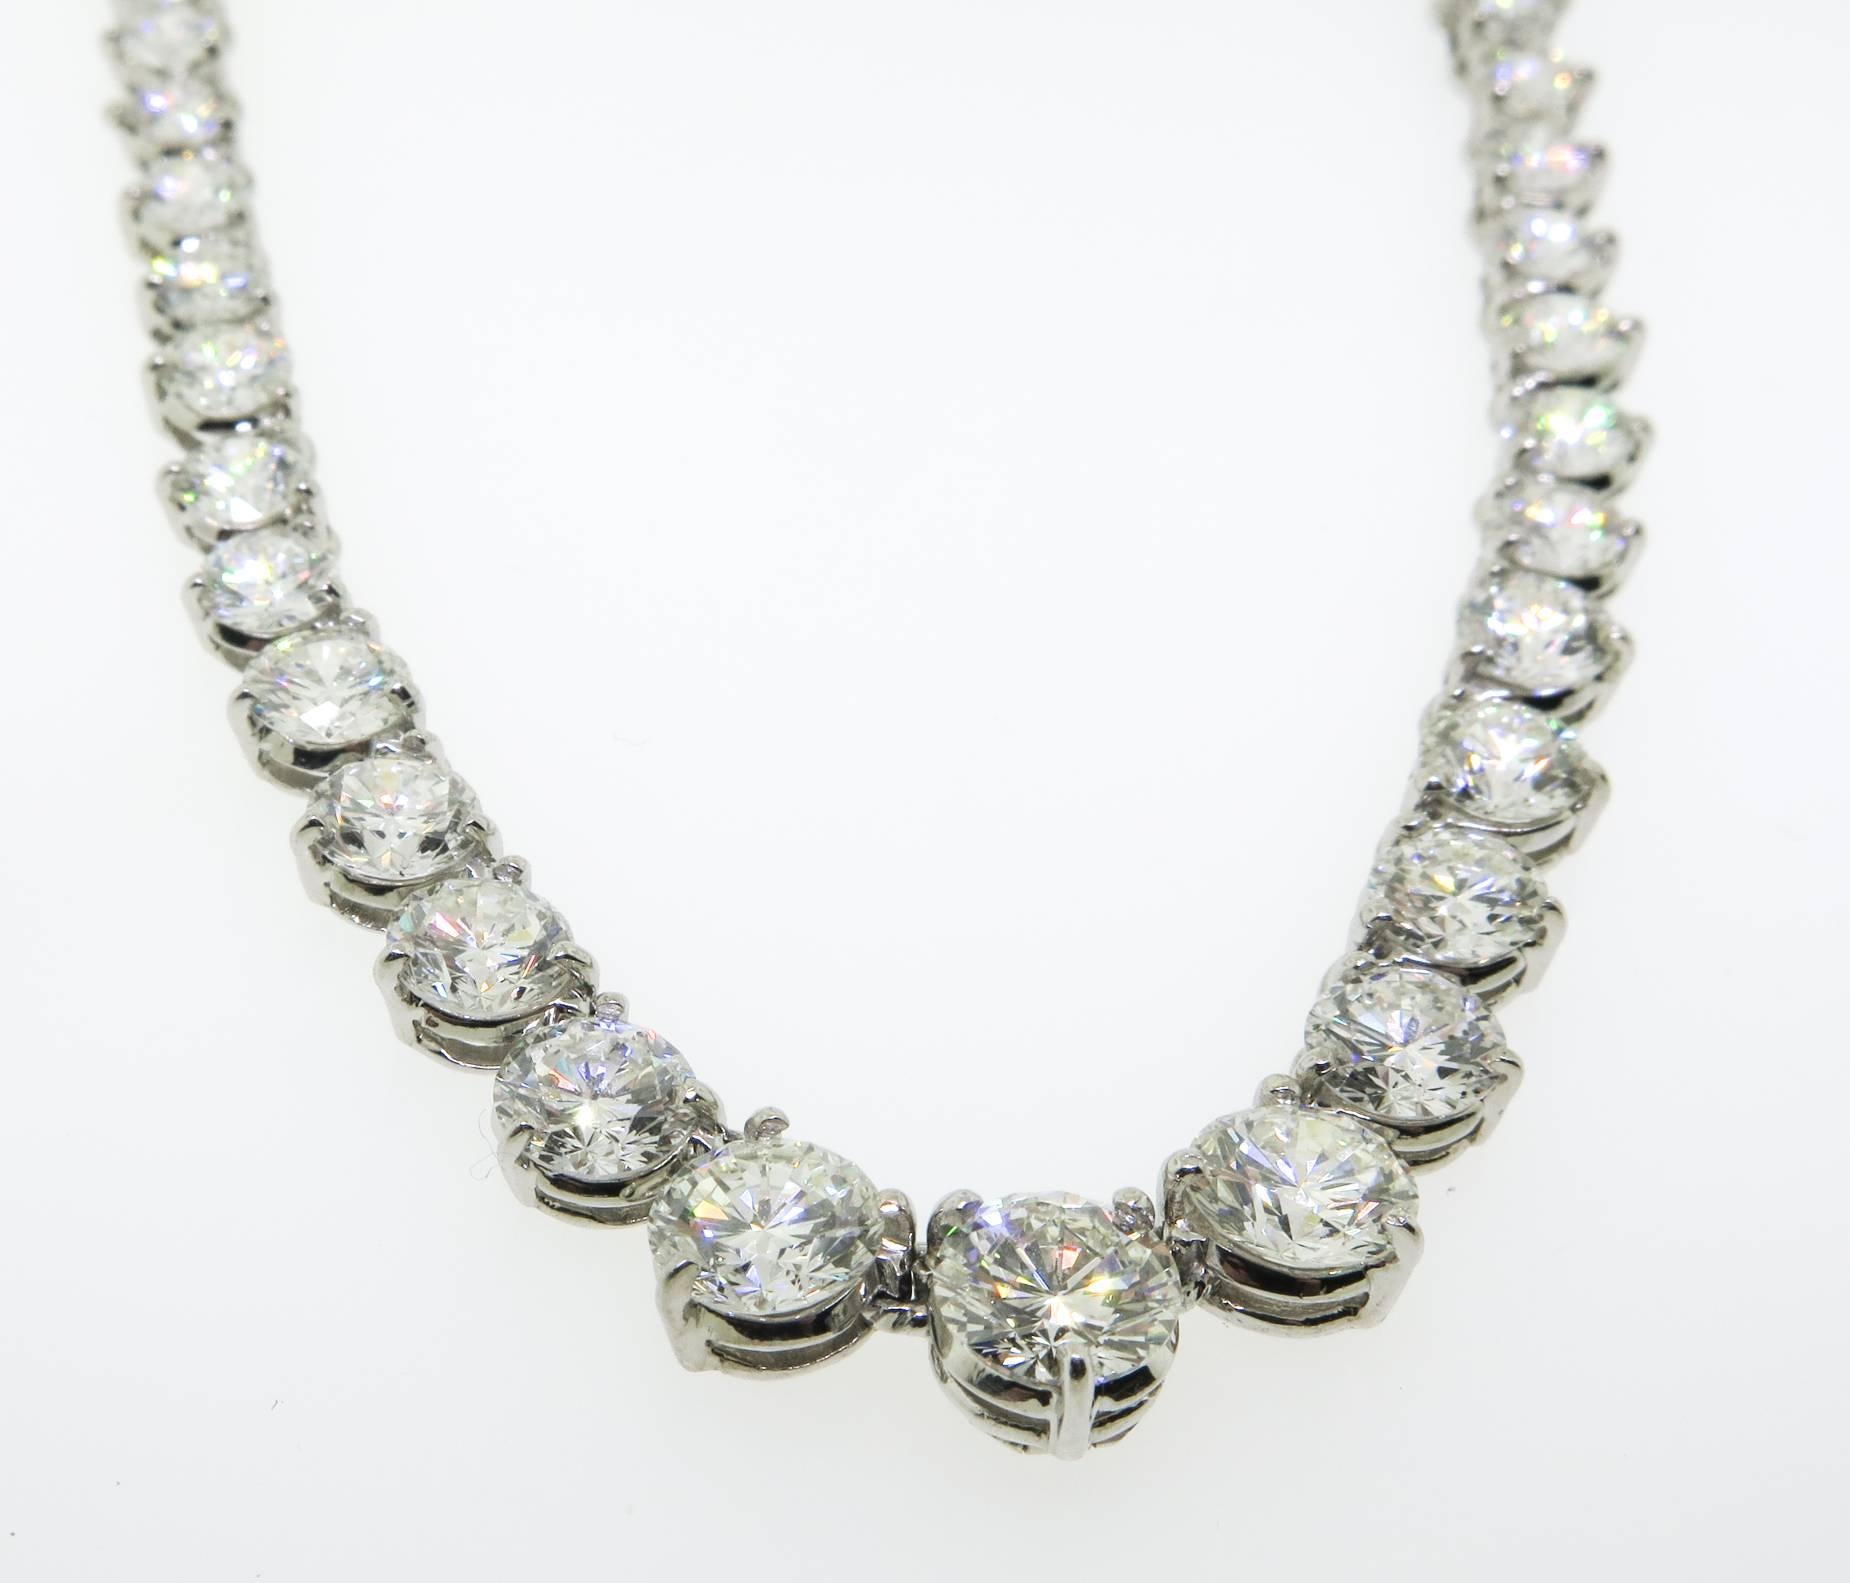 This stunning Riviera necklace features 71 round brilliant cut diamonds with a total carat weight of 24.90 carats. The diamonds are F-G in color and VS1-VS2 in clarity. The diamonds are prong set individually and the diamonds graduate in size. The